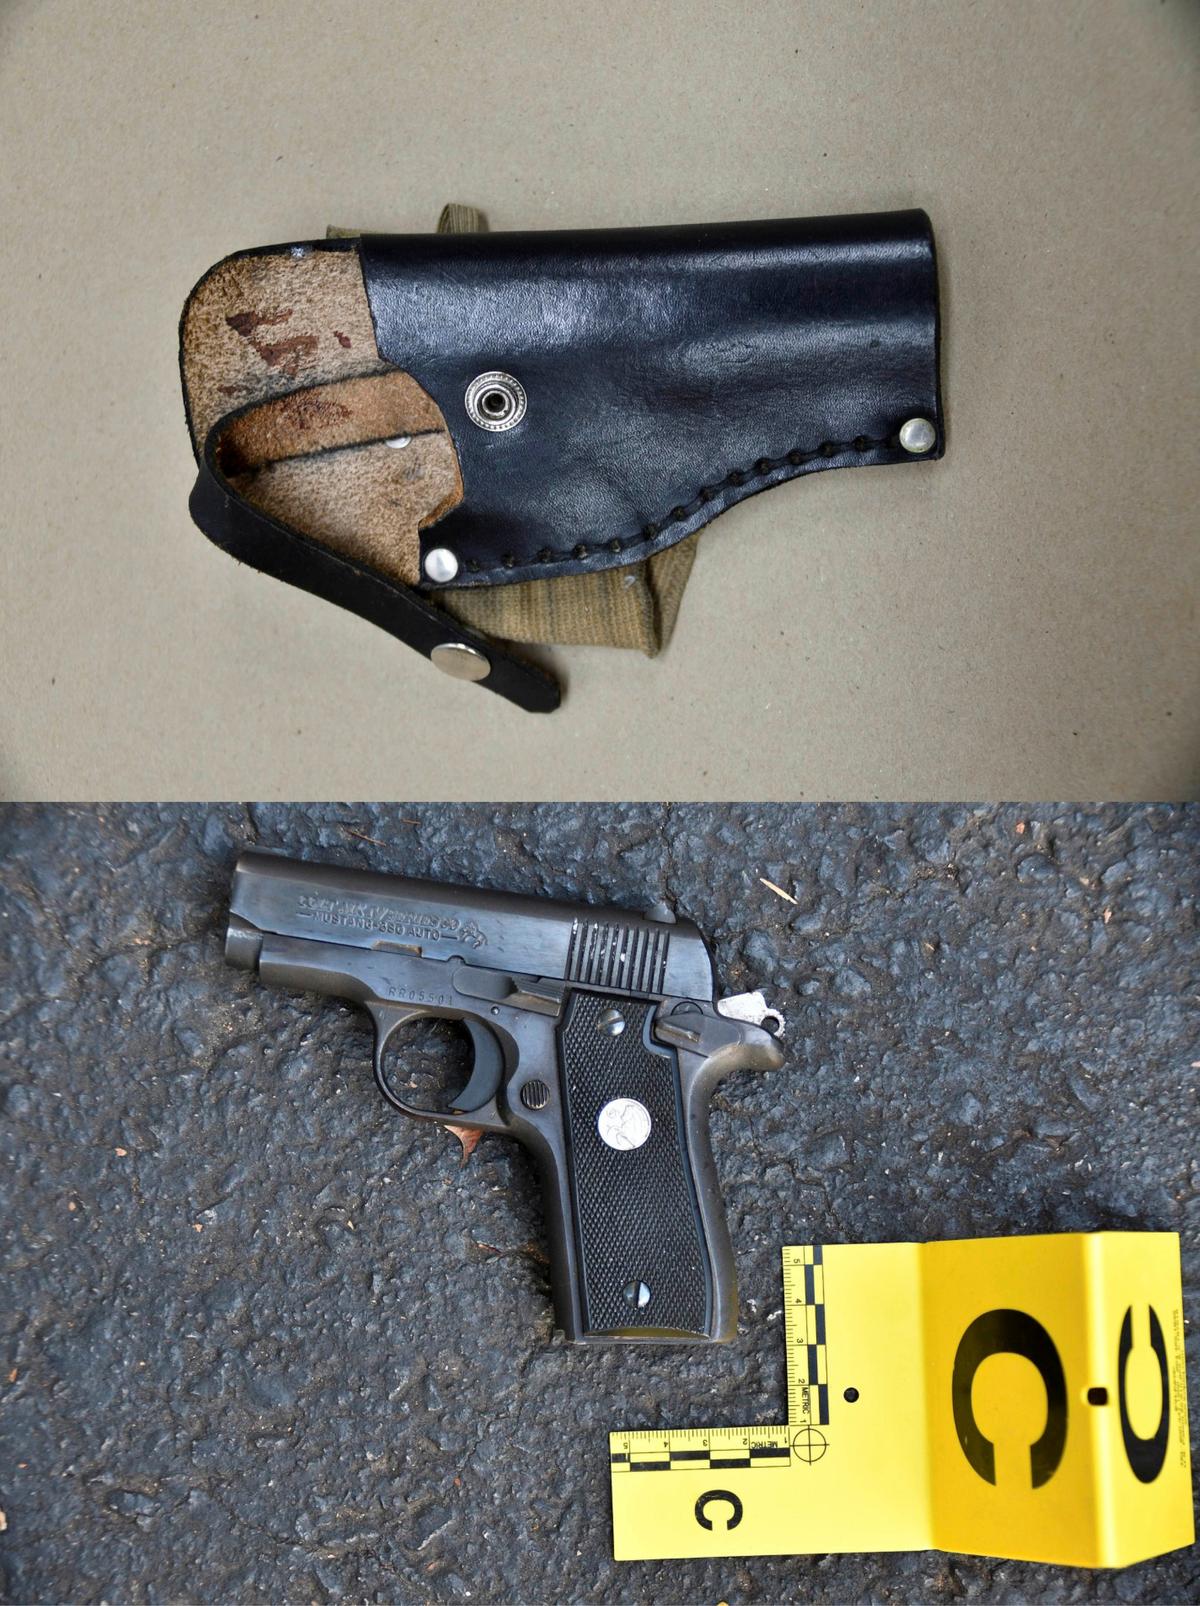 An ankle holster (Top) and gun which police say were in Keith Scott's possession at the time he was fatally shot by police in Charlotte, N.C., on Sept. 20, 2016. (Charlotte-Mecklenburg Police Department via AP)